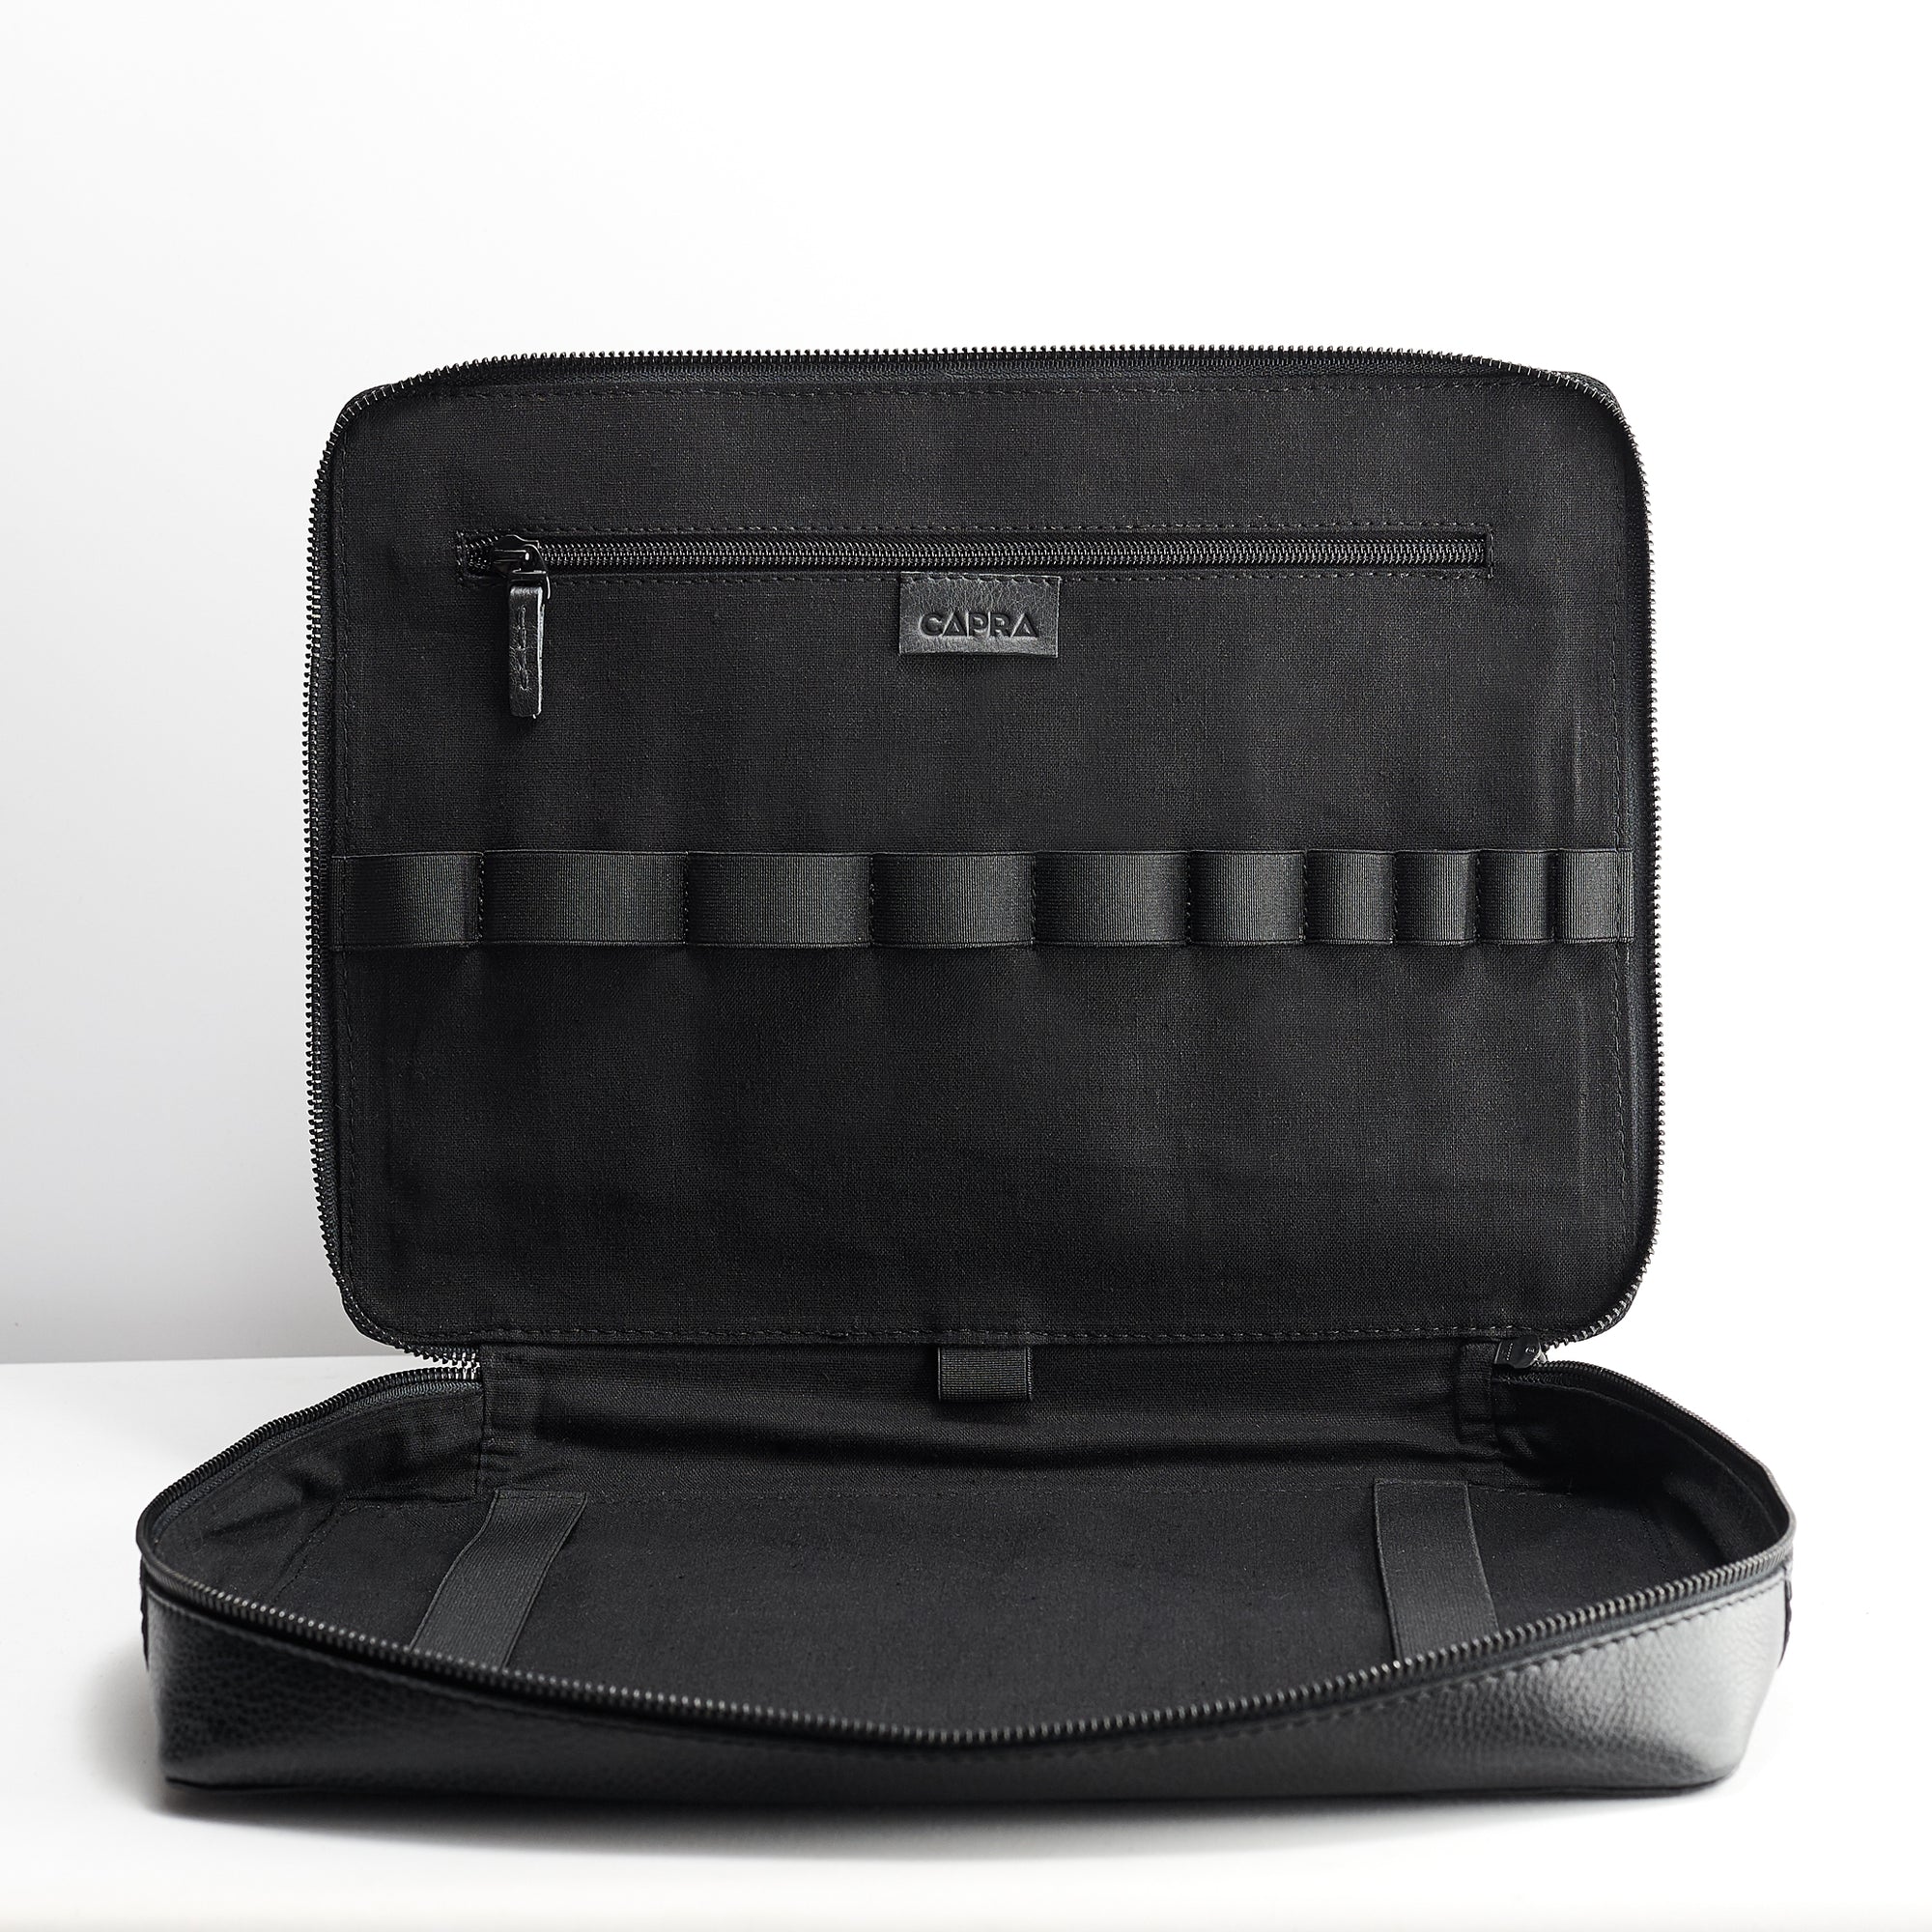 Elastic slots for cables. Black tech organizer by Capra Leather